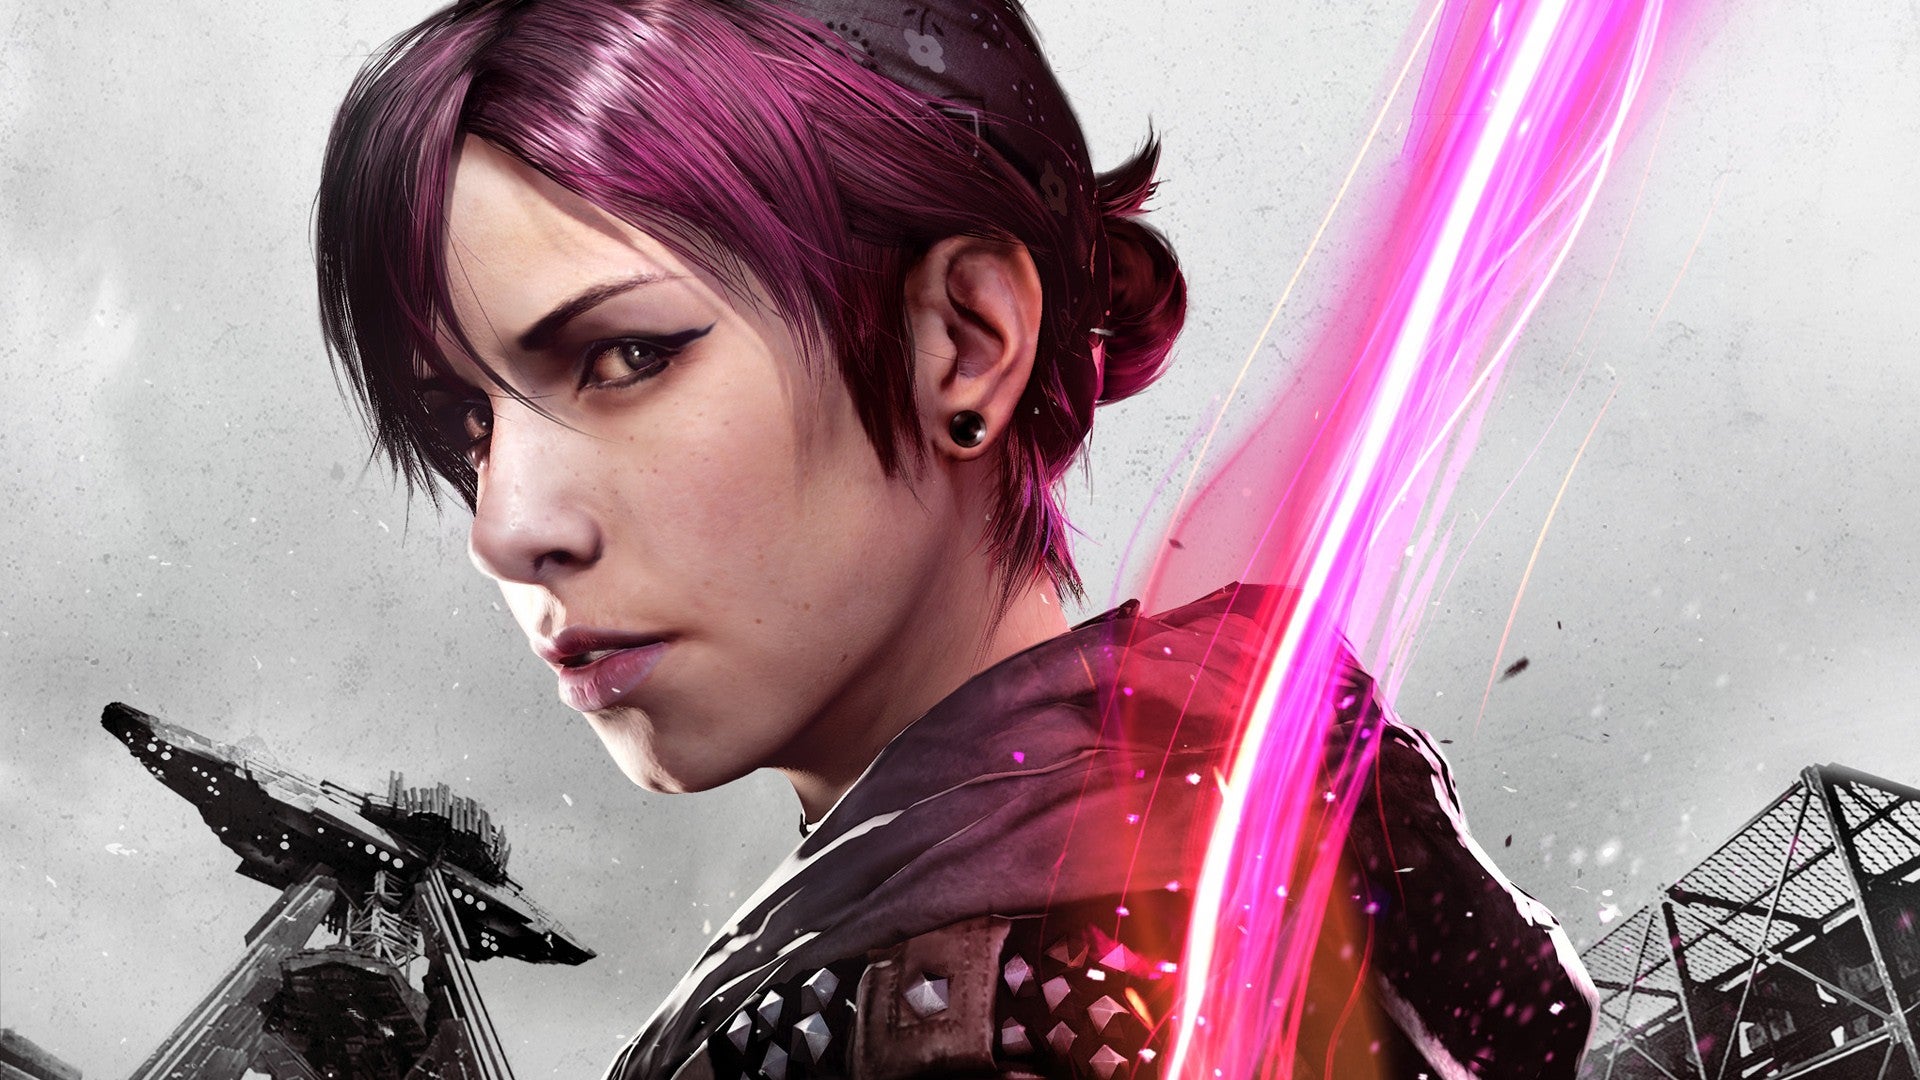 Image for InFamous First Light PS4 Pro Analysis